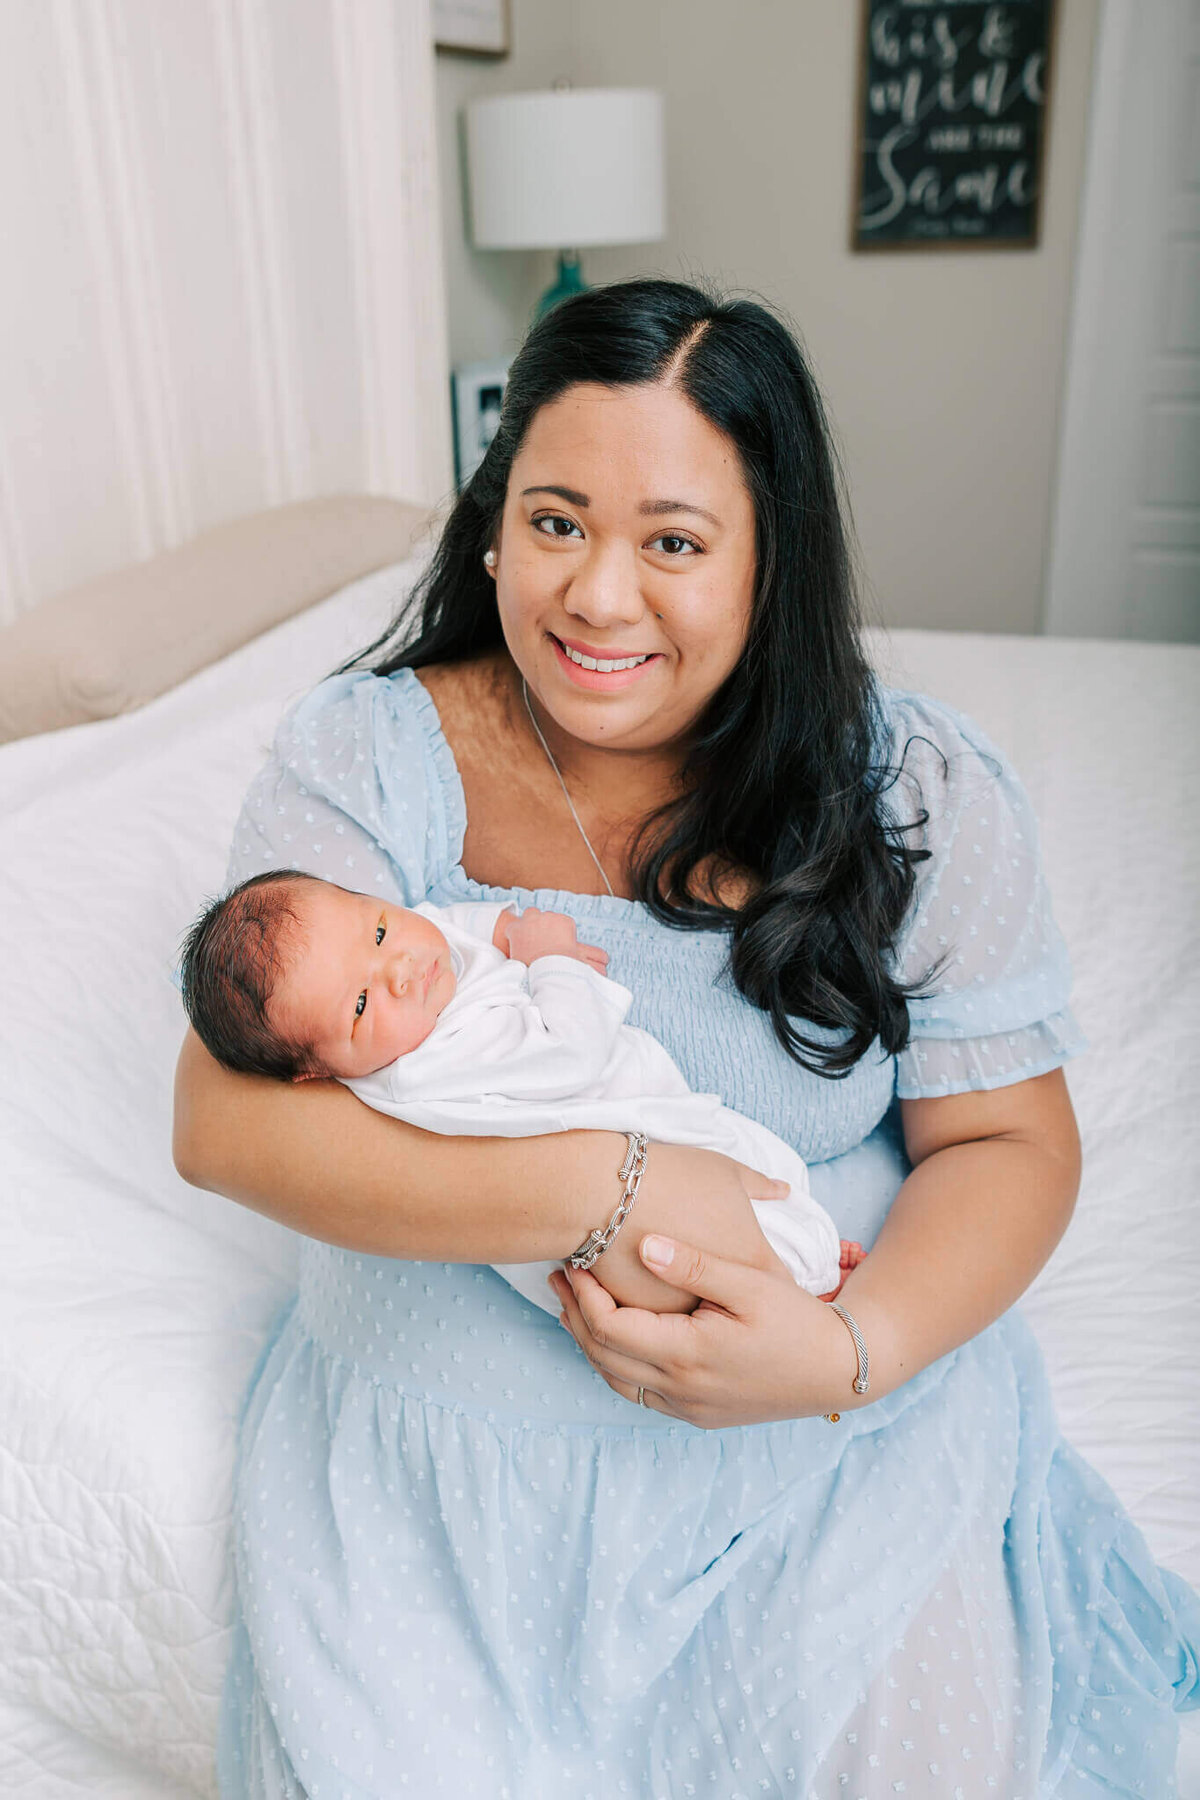 New mom holding her baby boy during their in-home newborn session in Aiken, South Carolina